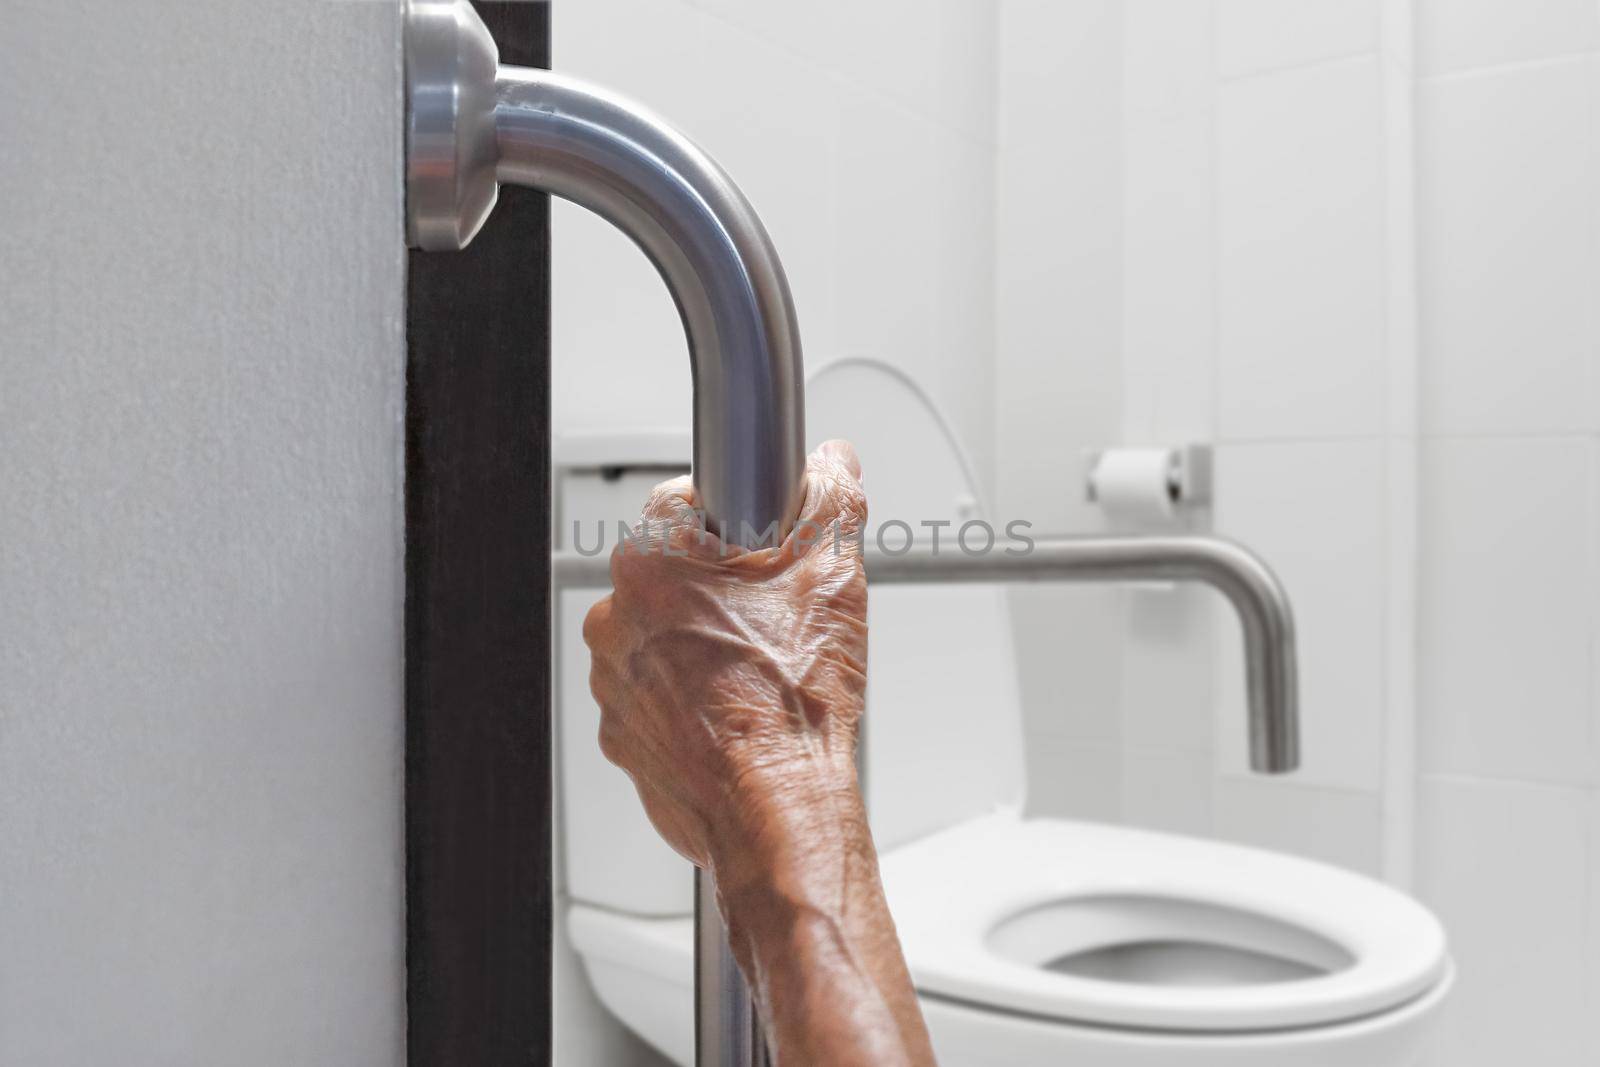 Elderly woman holding on handrail in bathroom by toa55